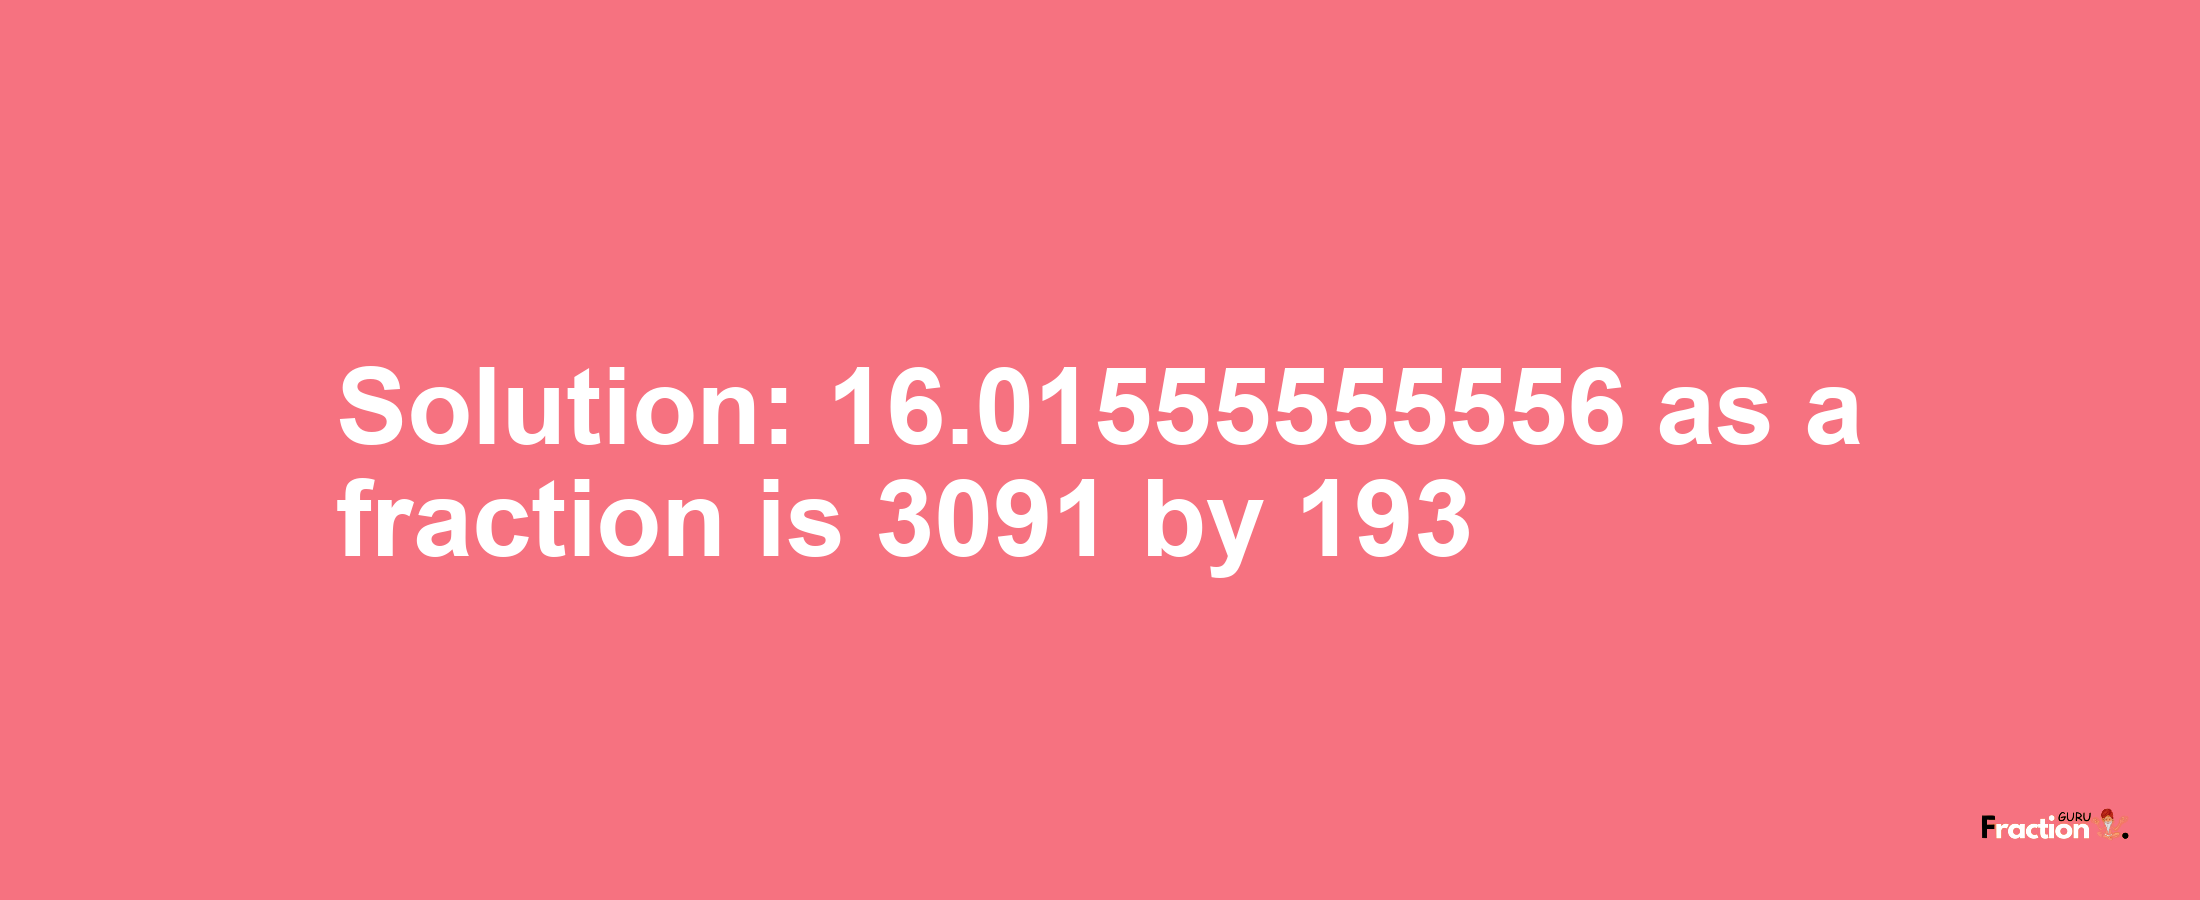 Solution:16.01555555556 as a fraction is 3091/193